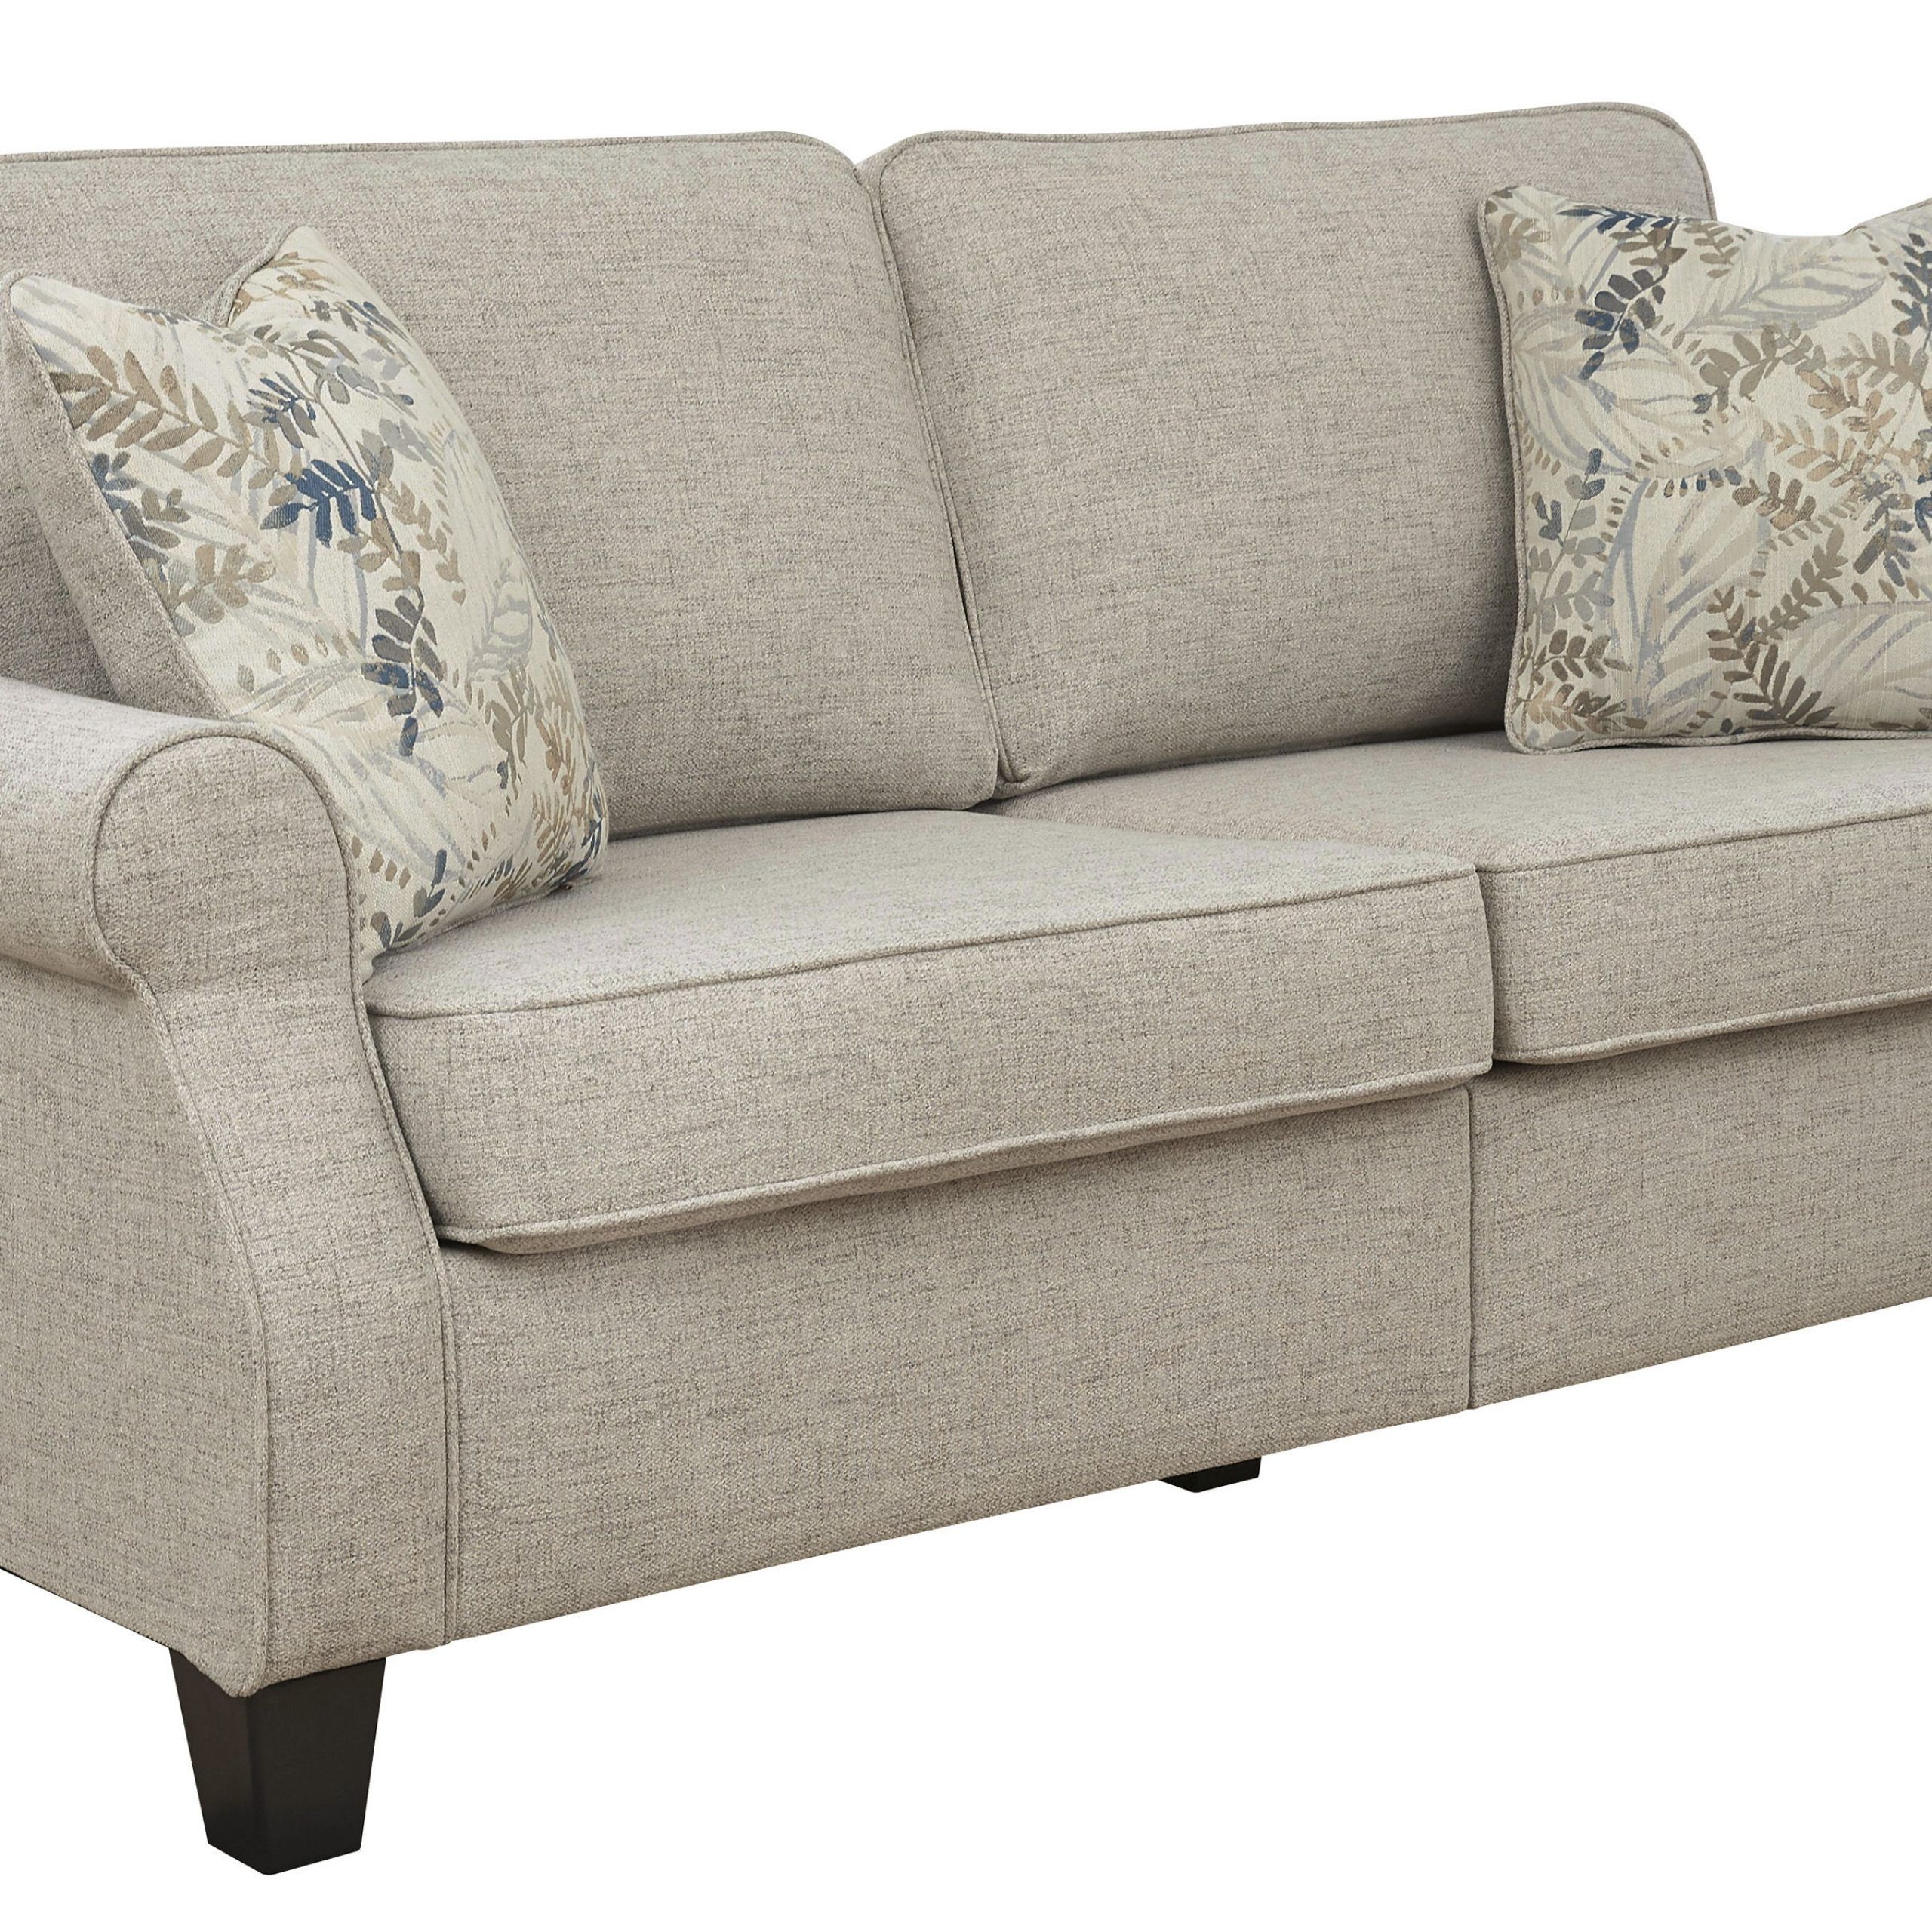 Ashley Furniture Alessio Beige Sofa | The Classy Home For Ecru And Otter Coffee Tables (View 4 of 15)